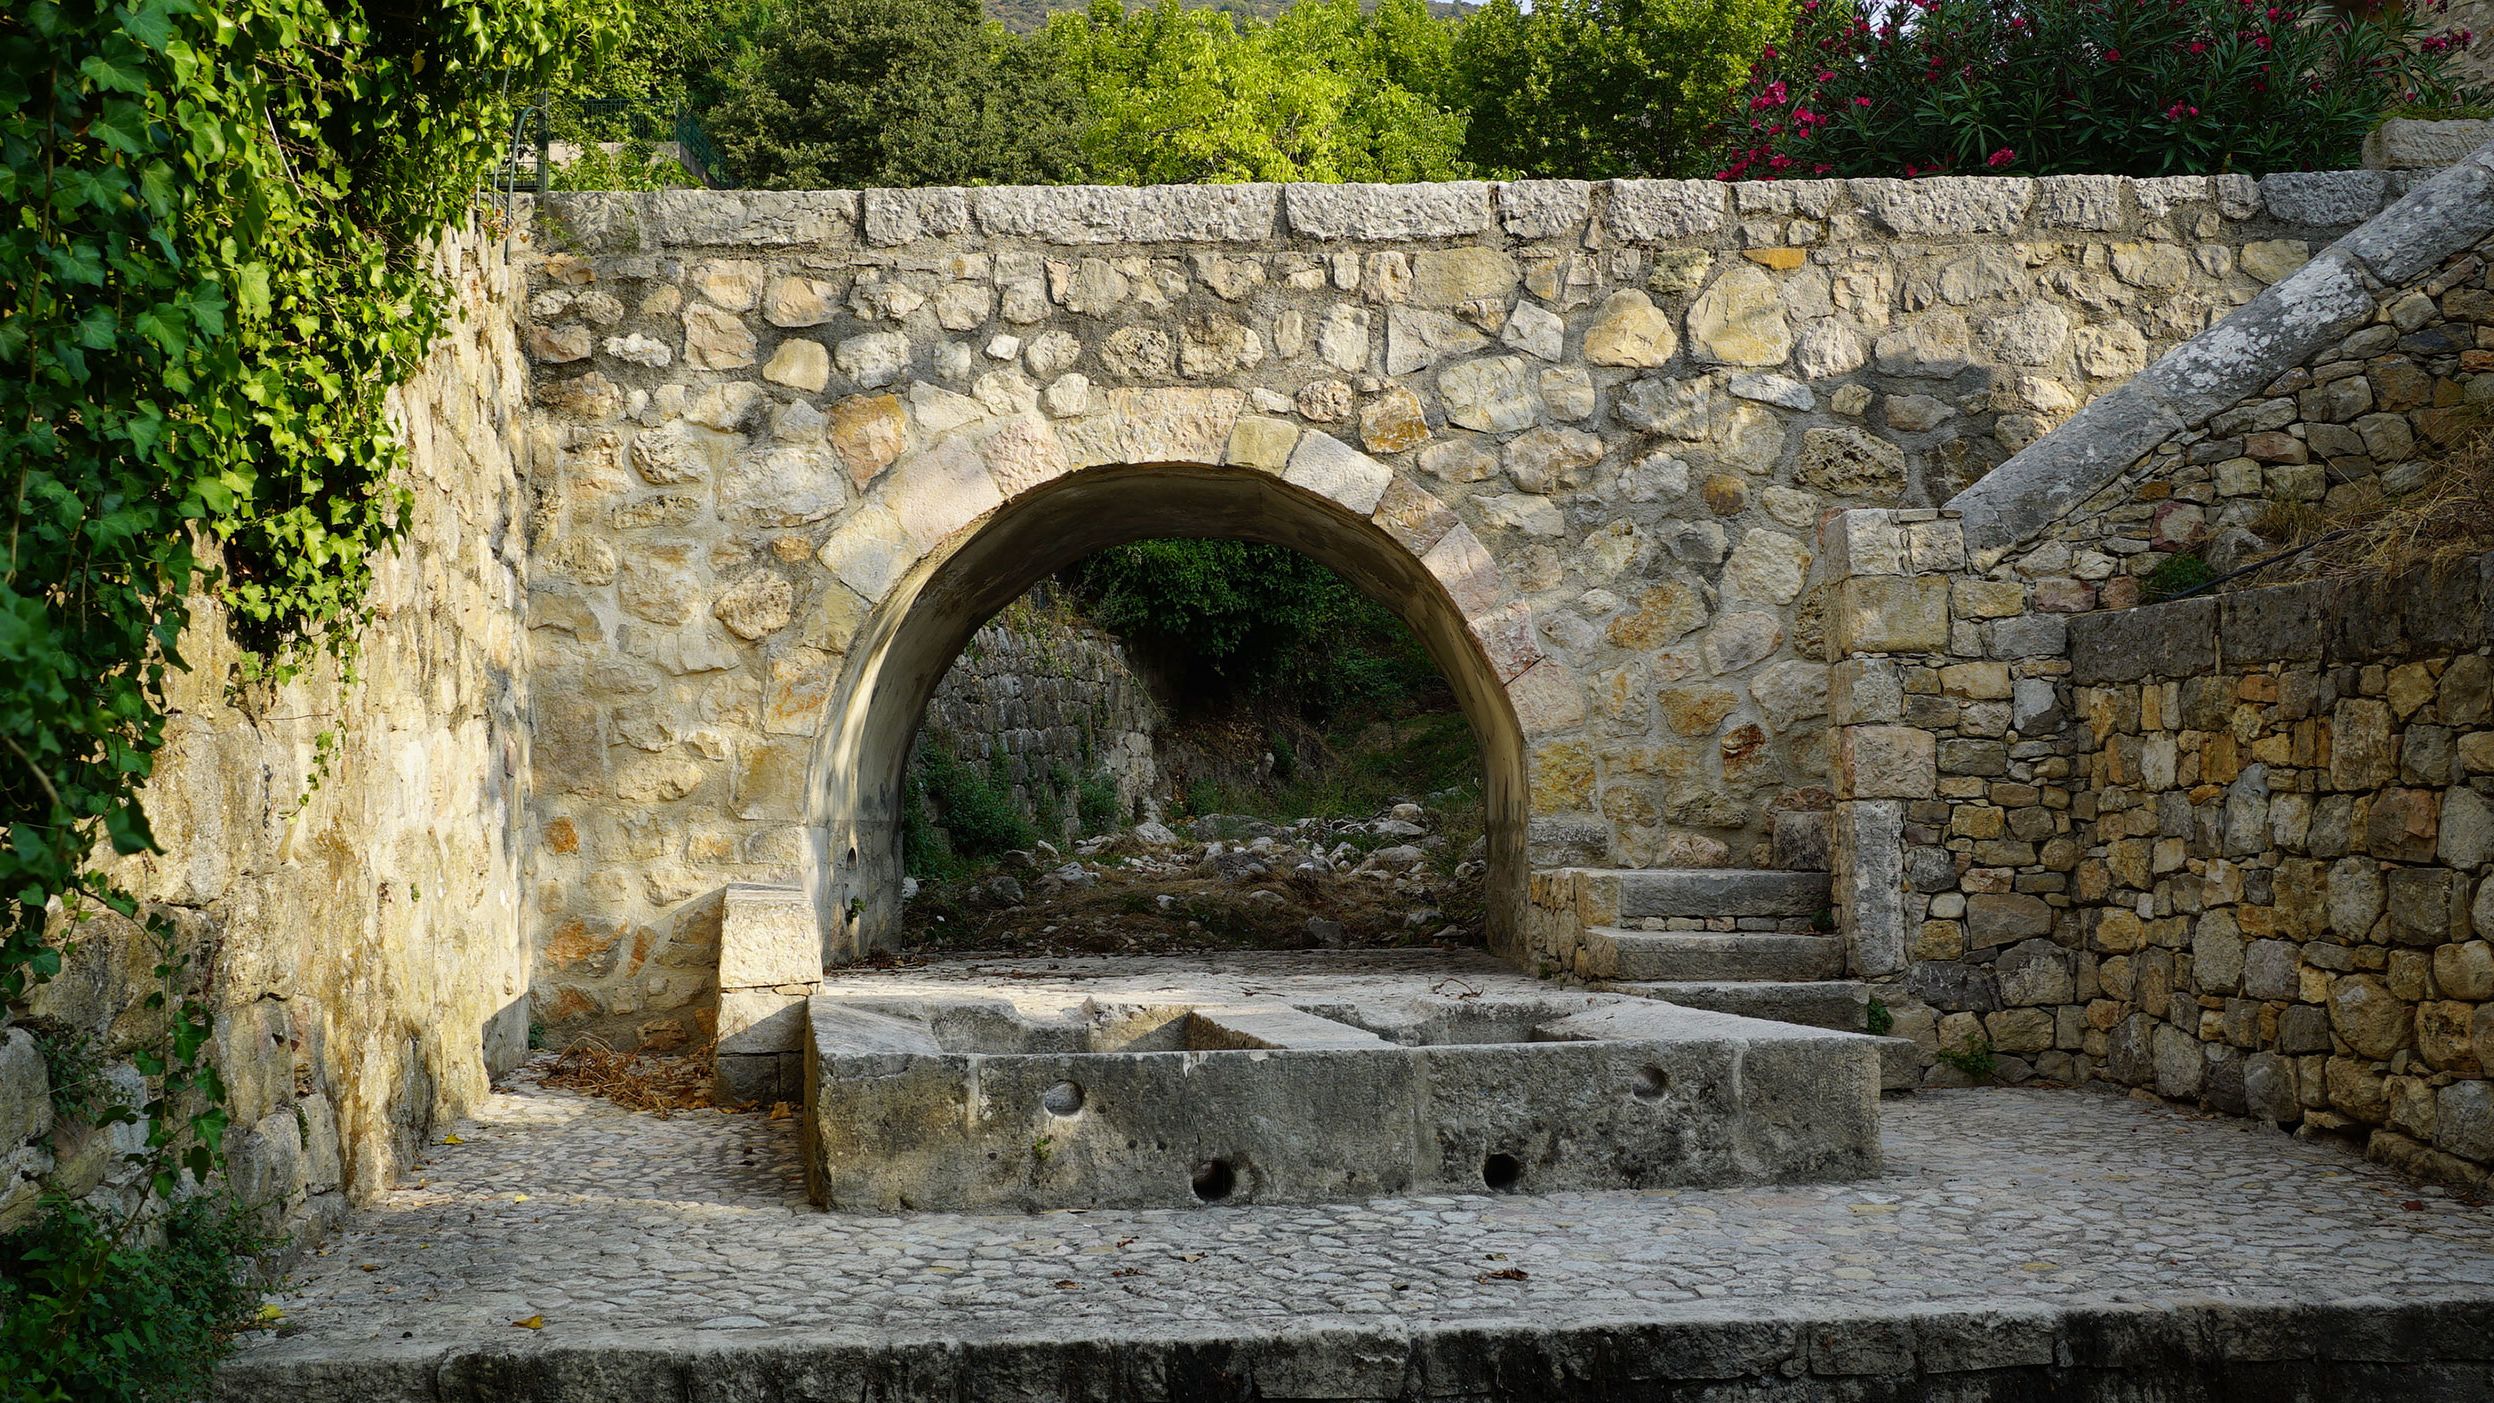 The traditional wash basins or 'lavoirs' in Seillans sit empty as the stream that feeds them has dried out. 